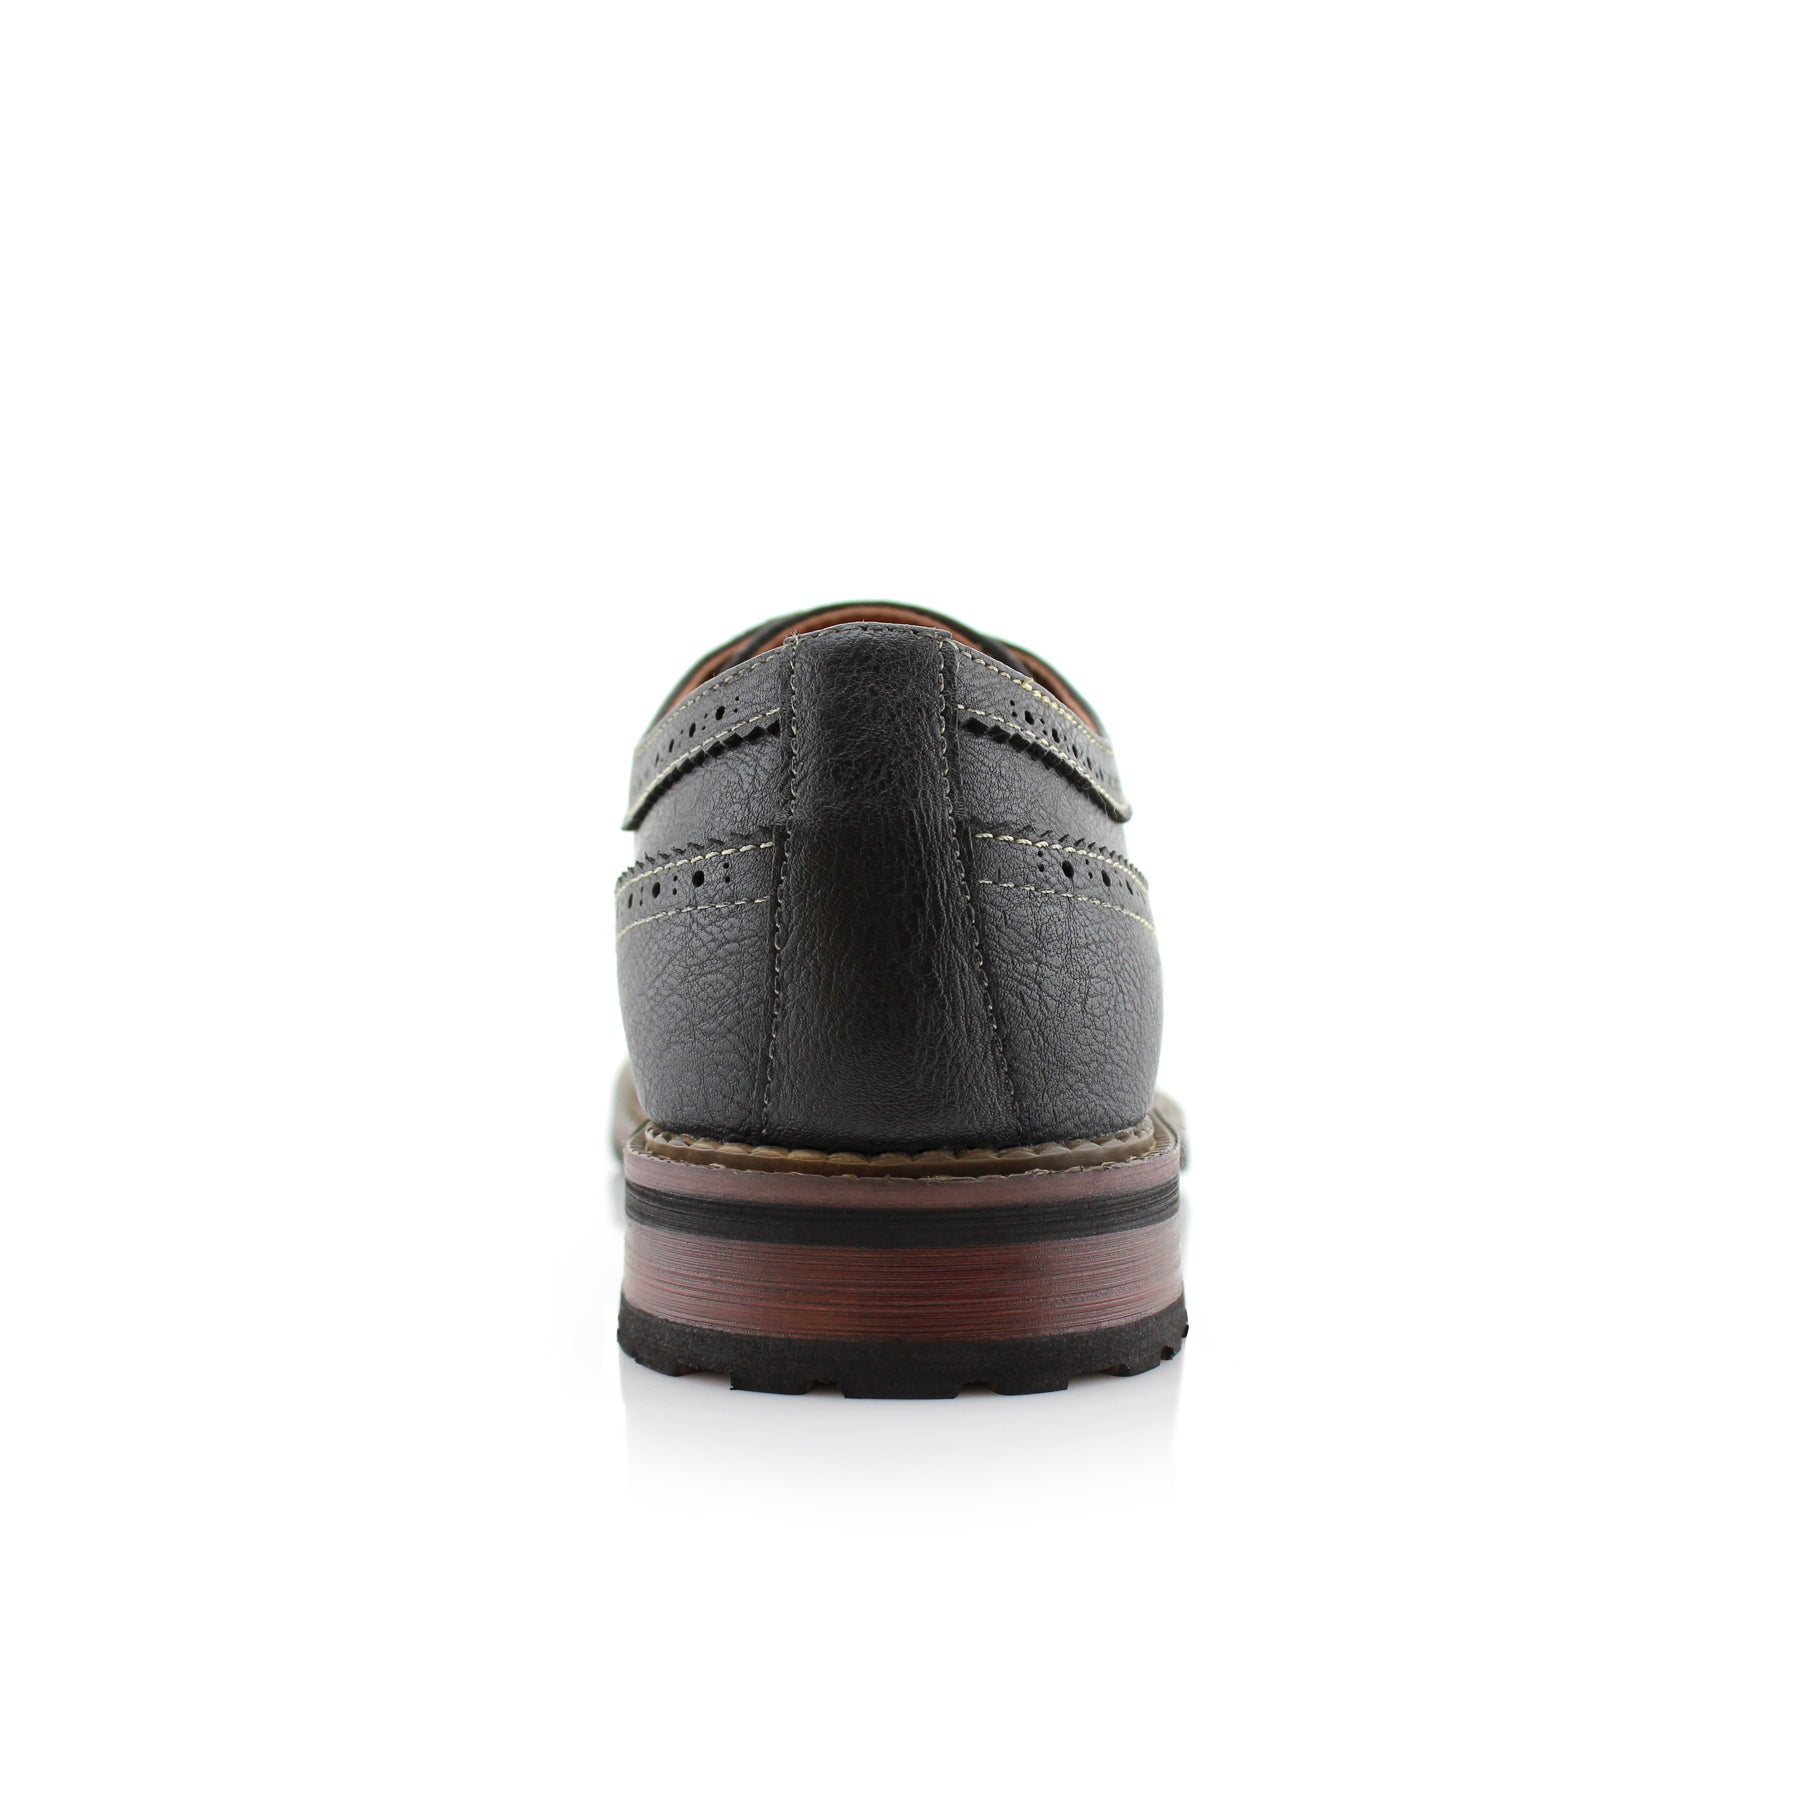 Longwing Brogue Derby Shoes | Phillip by Ferro Aldo | Conal Footwear | Back Angle View